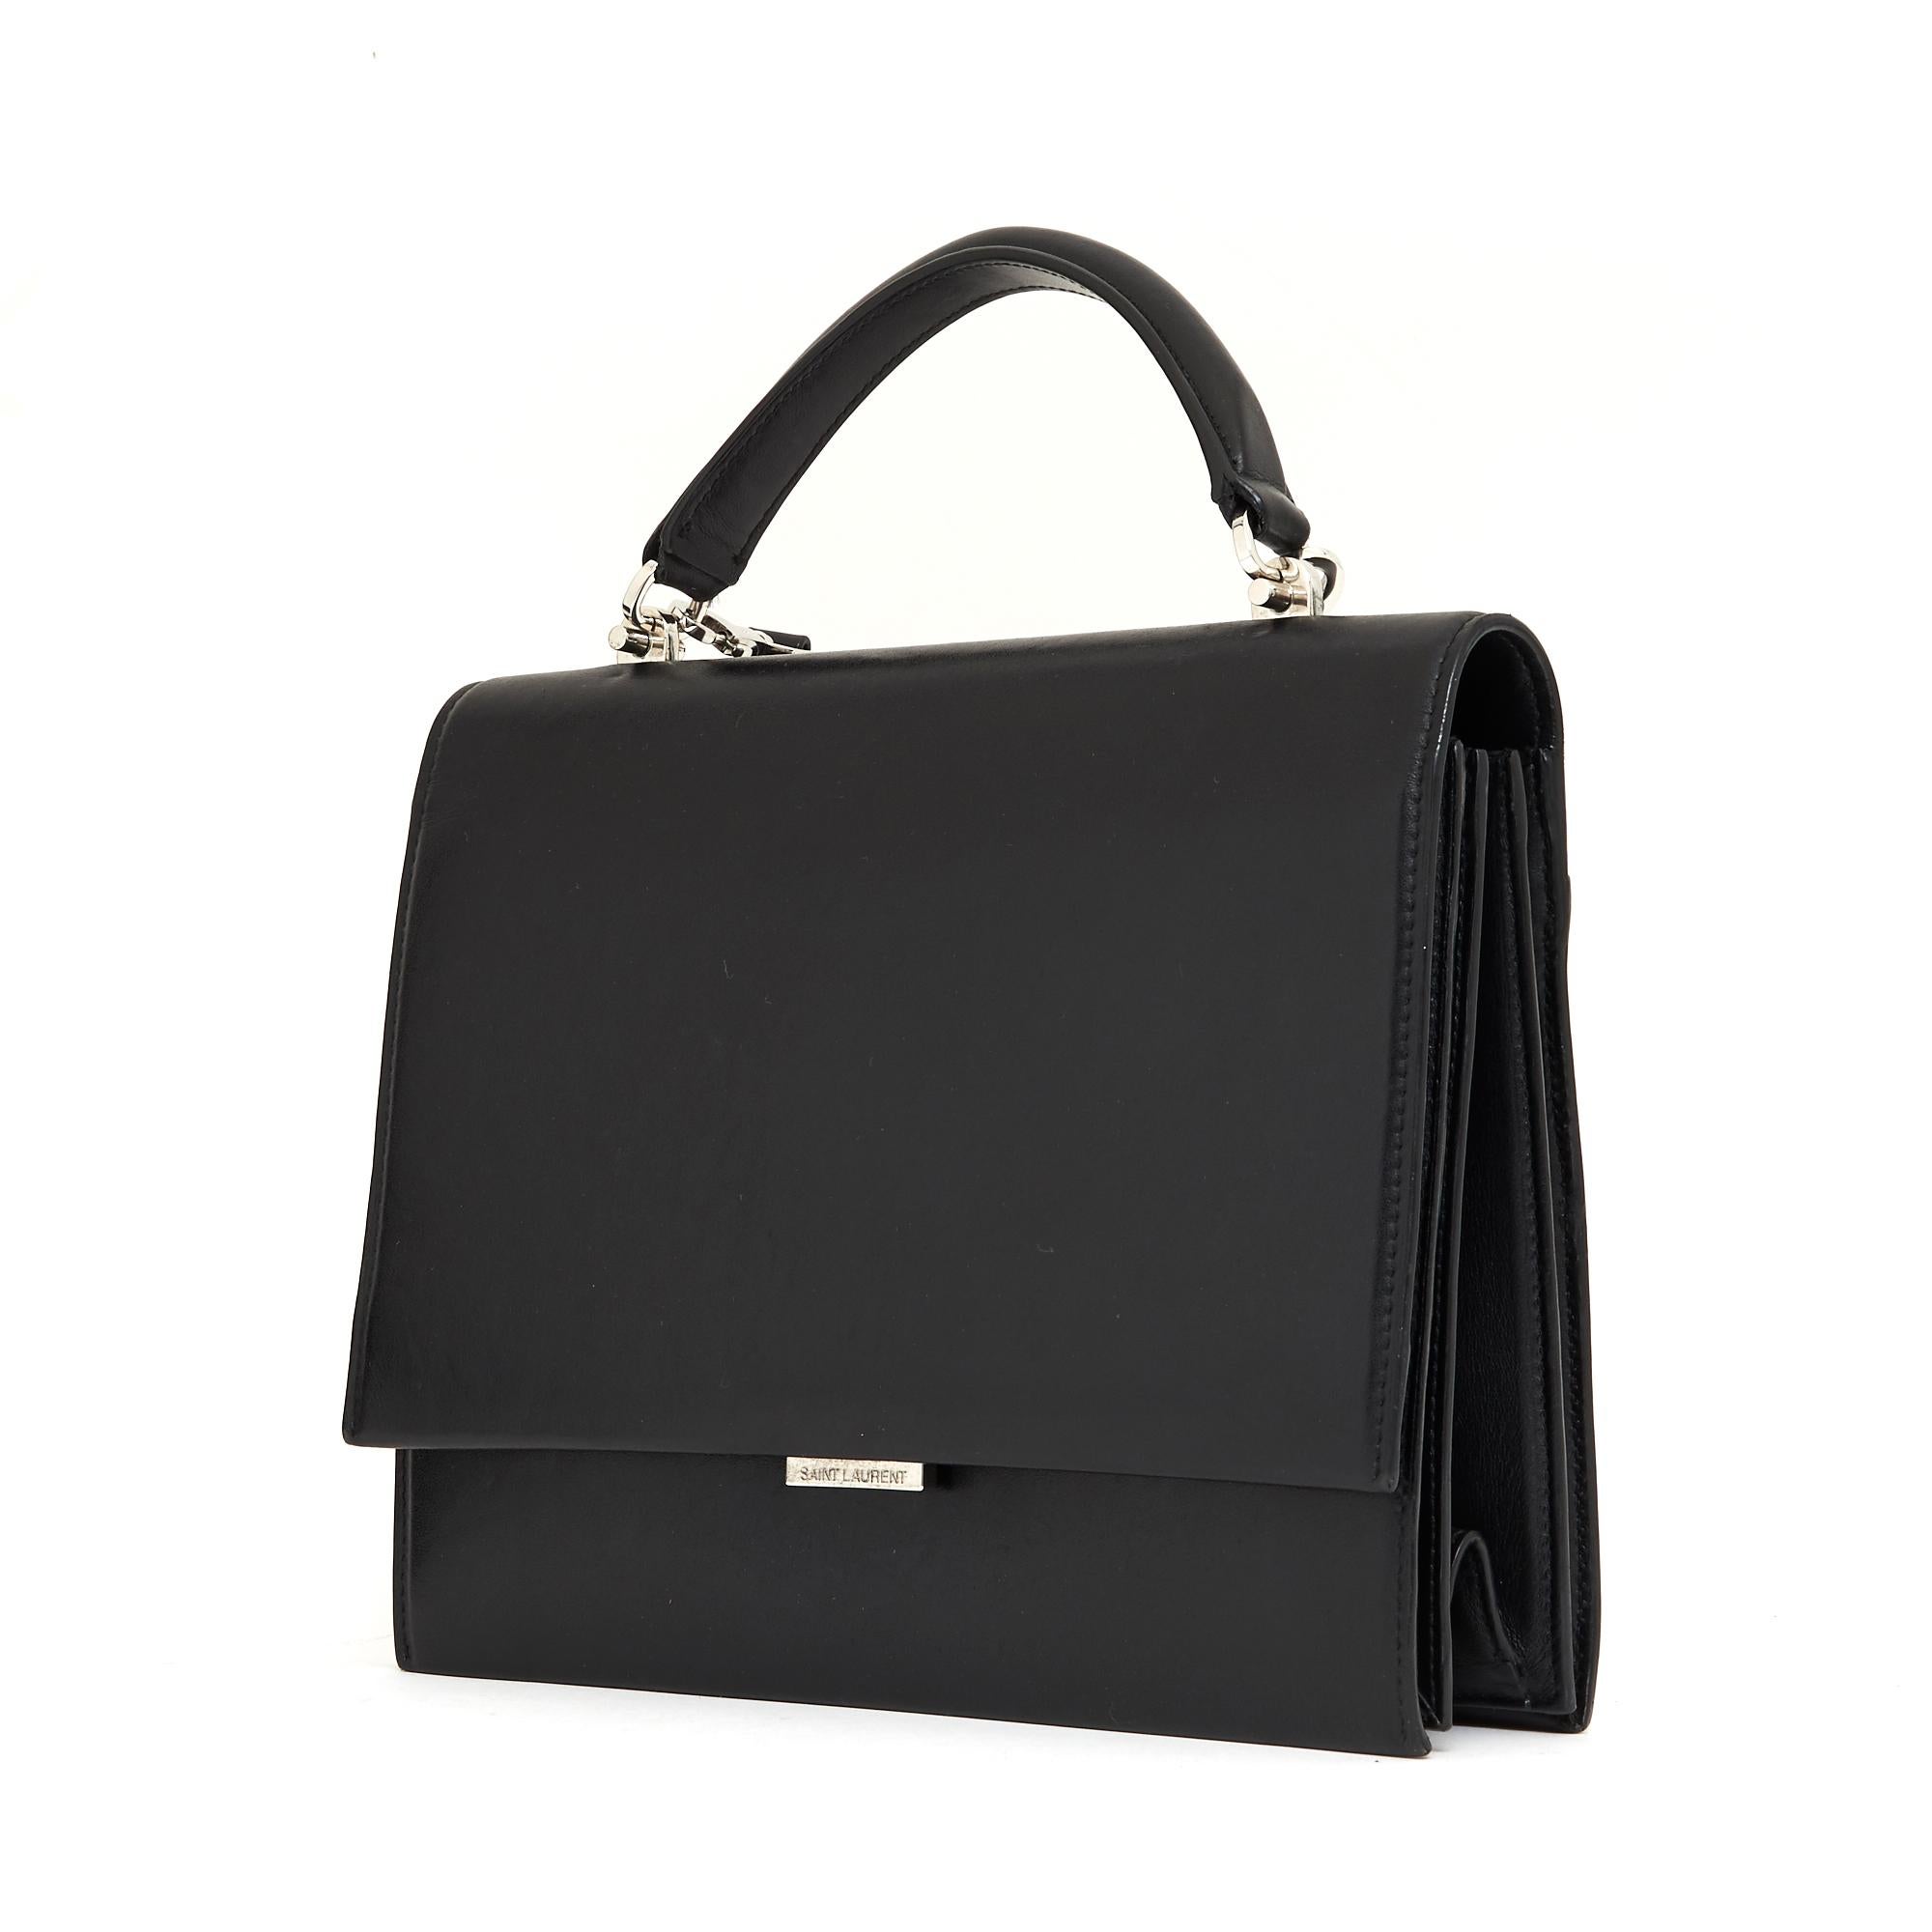 Saint Laurent Babylone model bag in black leather, black canvas interior with 3 compartments including 1 with a zipped pocket, vanity mirror with its stitched leather tab, 1 last pocket on the back, 1 handle for carrying the hand and 1 removable and